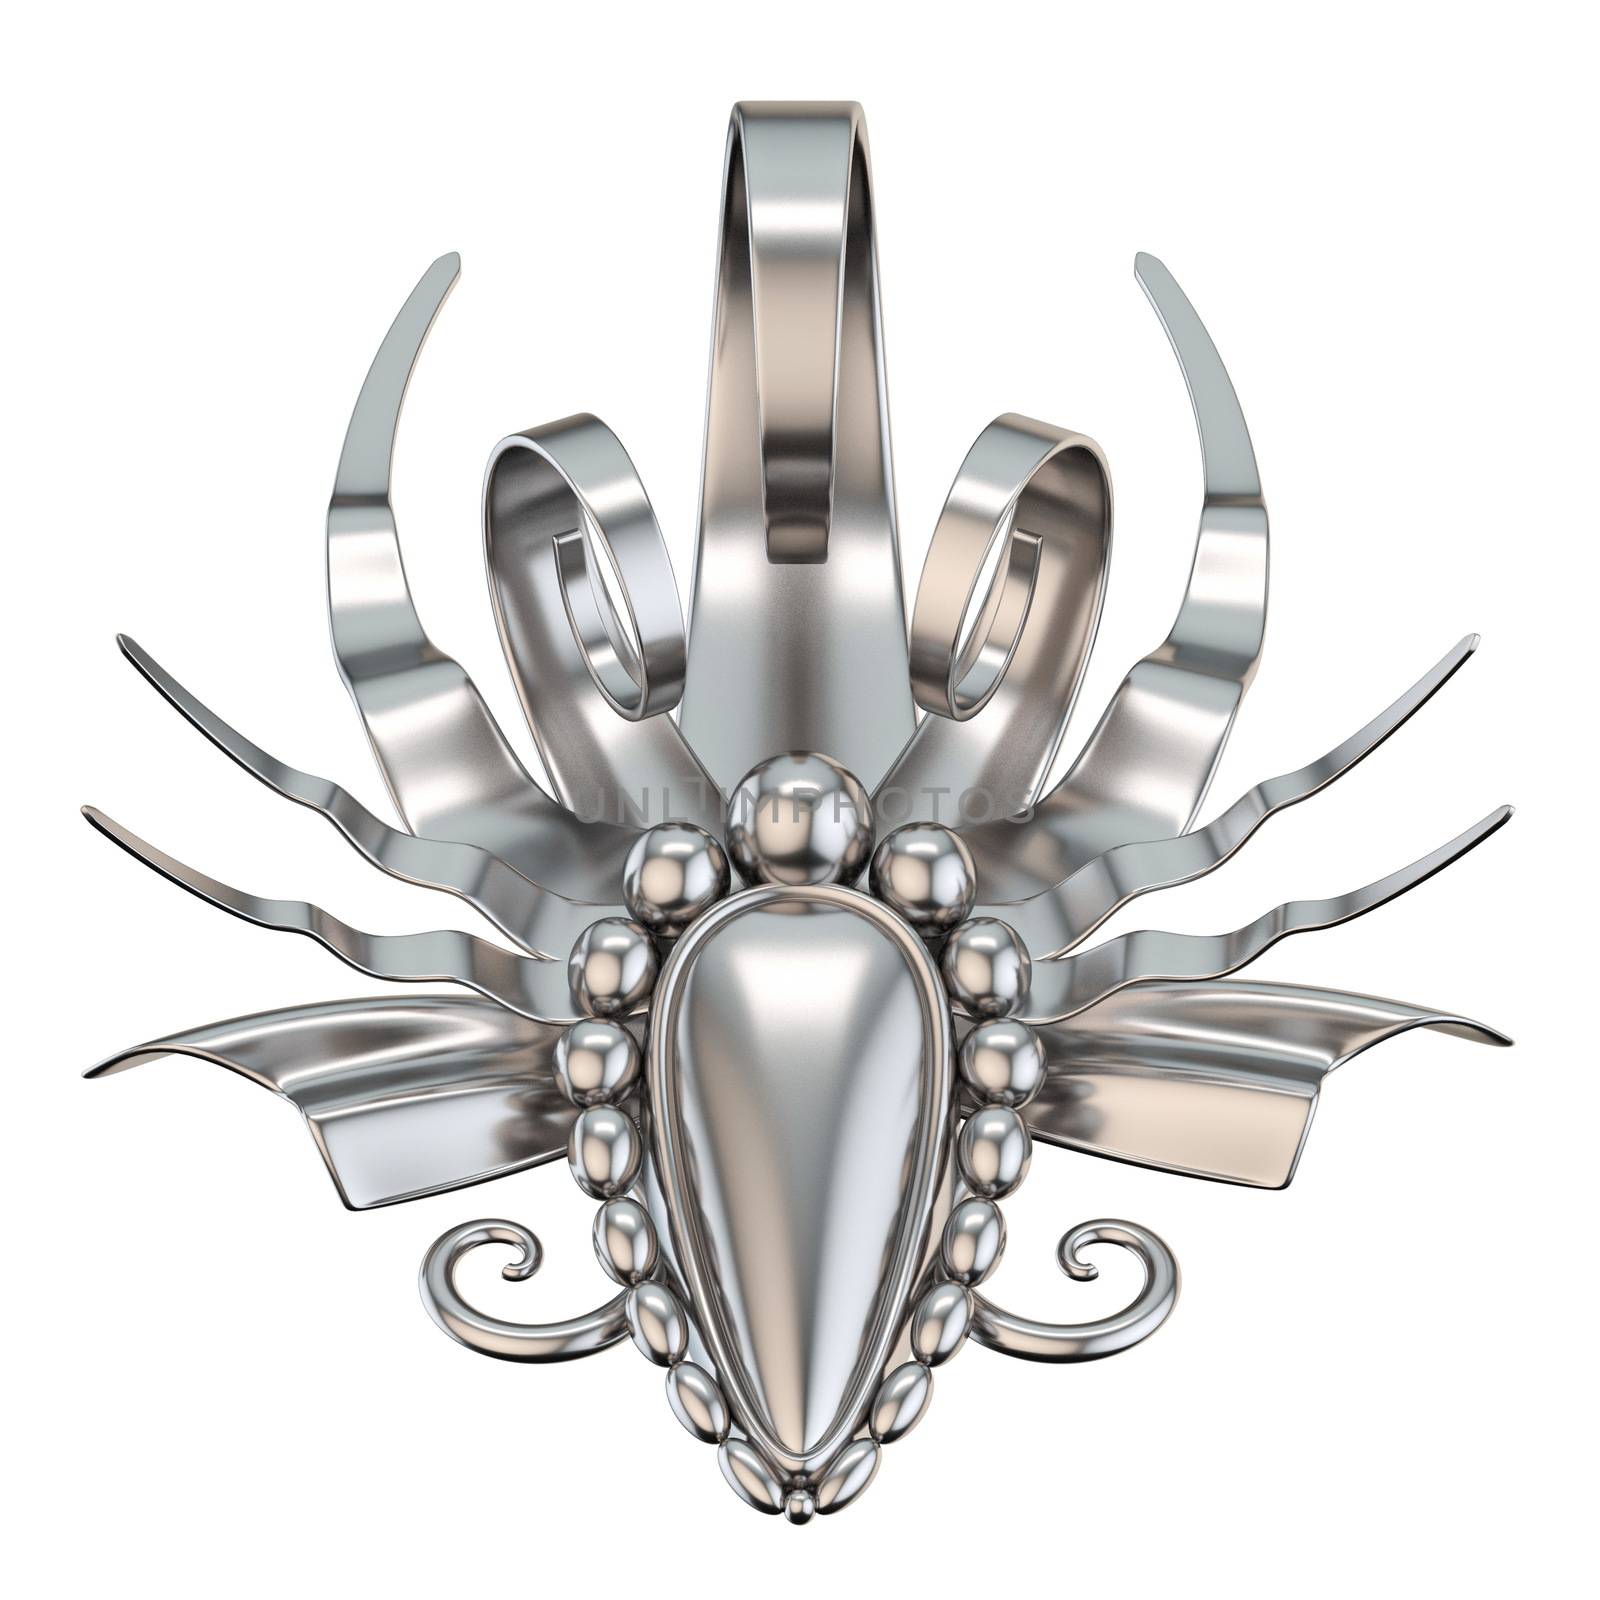 Abstract floral silver decoration 3D by djmilic